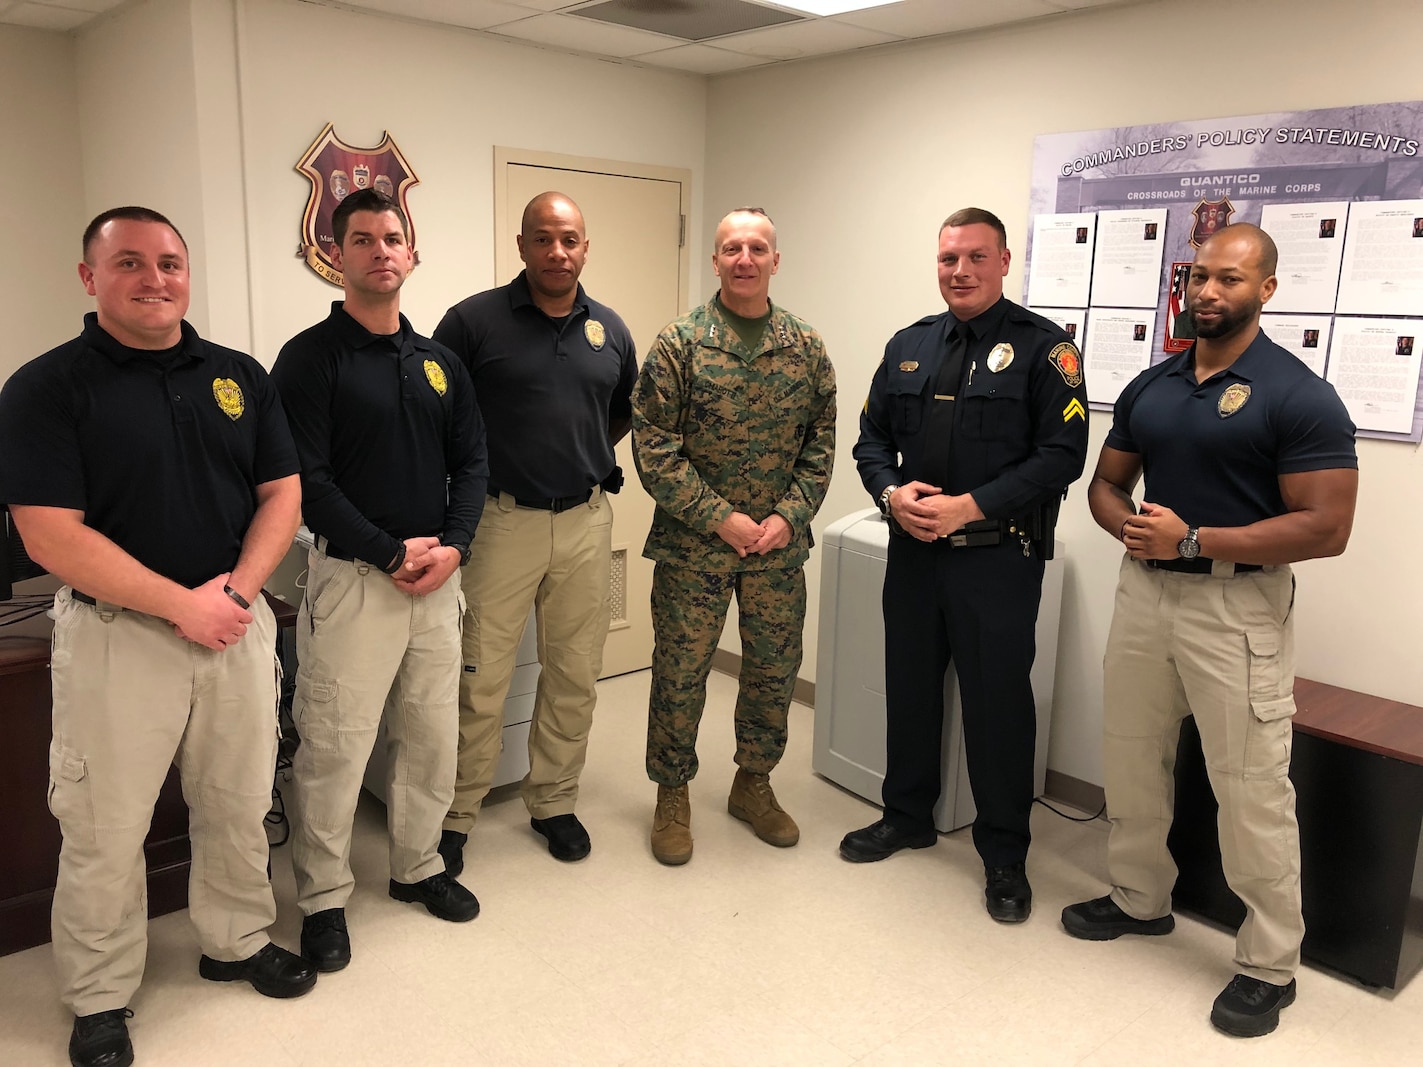 LtGen Chiarotti made a personal visit to Security Battalion to shake the hands of the Officers that took part in the apprehension of a potentially threatening situation aboard MCB Quantico.